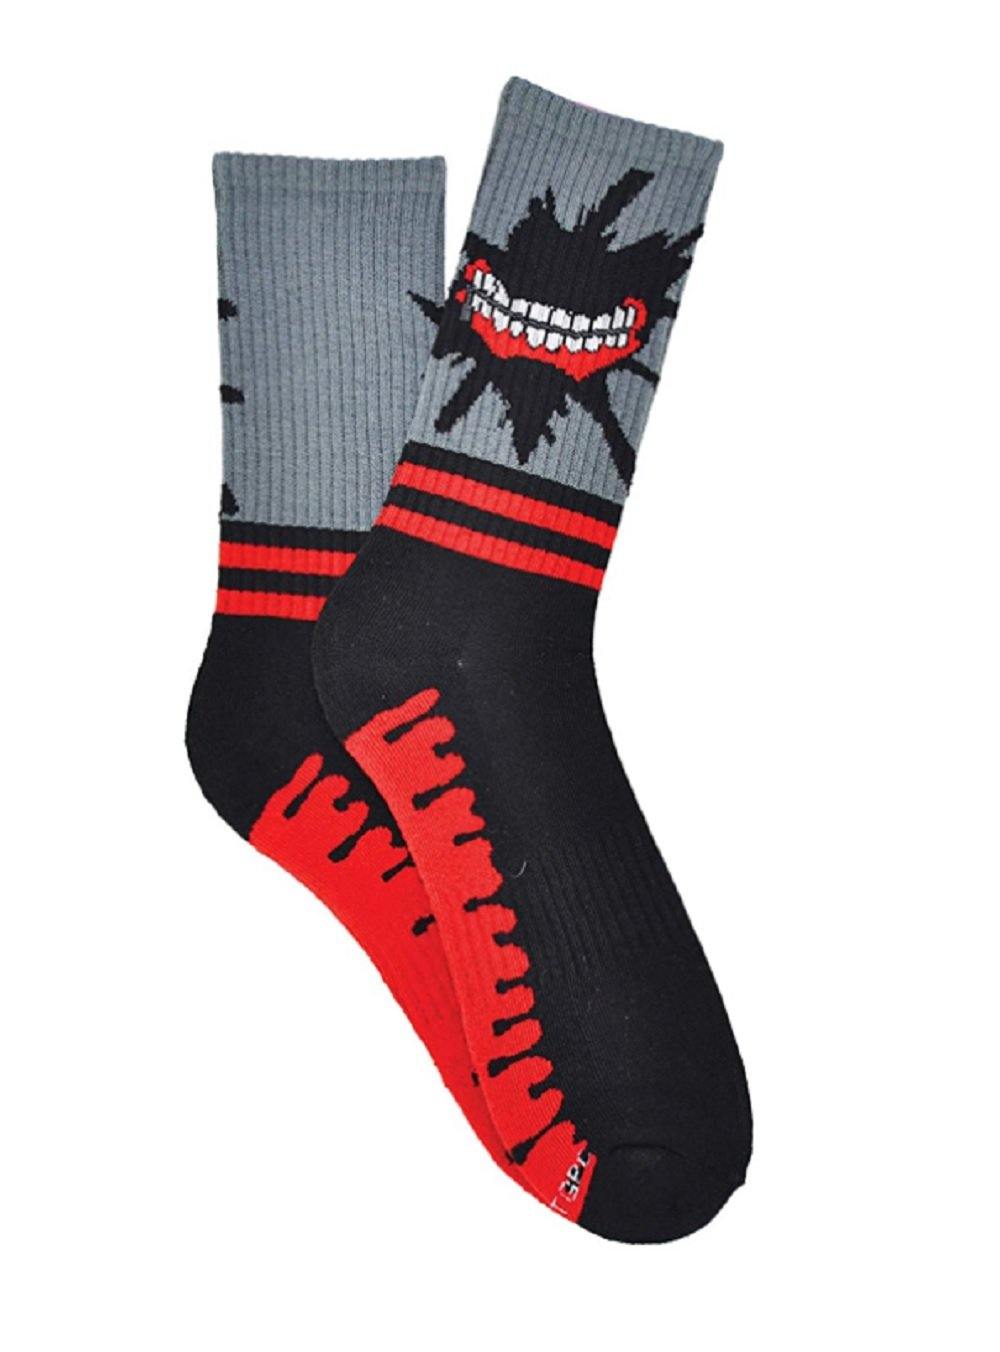 Tokyo Ghoul Mouth Anime Athletic Crew Sock